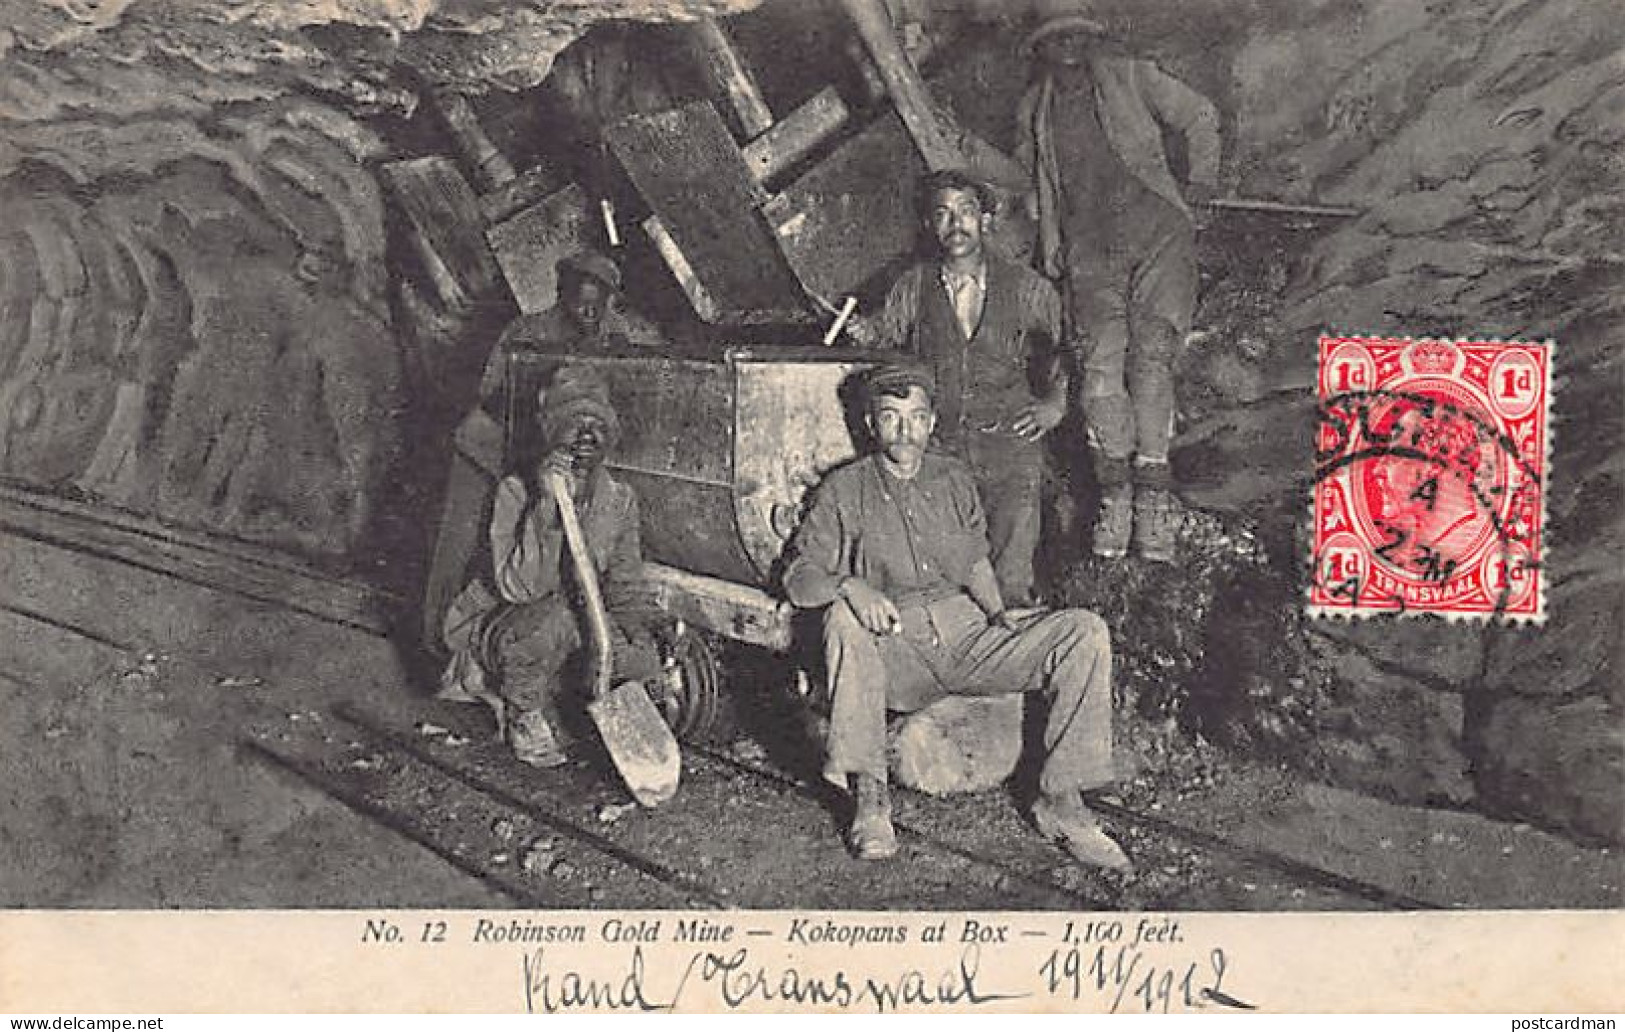 South Africa - Robinson Deep Gold Mine - Kokopans At Box, 1,100 Feet - Publ. Unknown 12 - South Africa